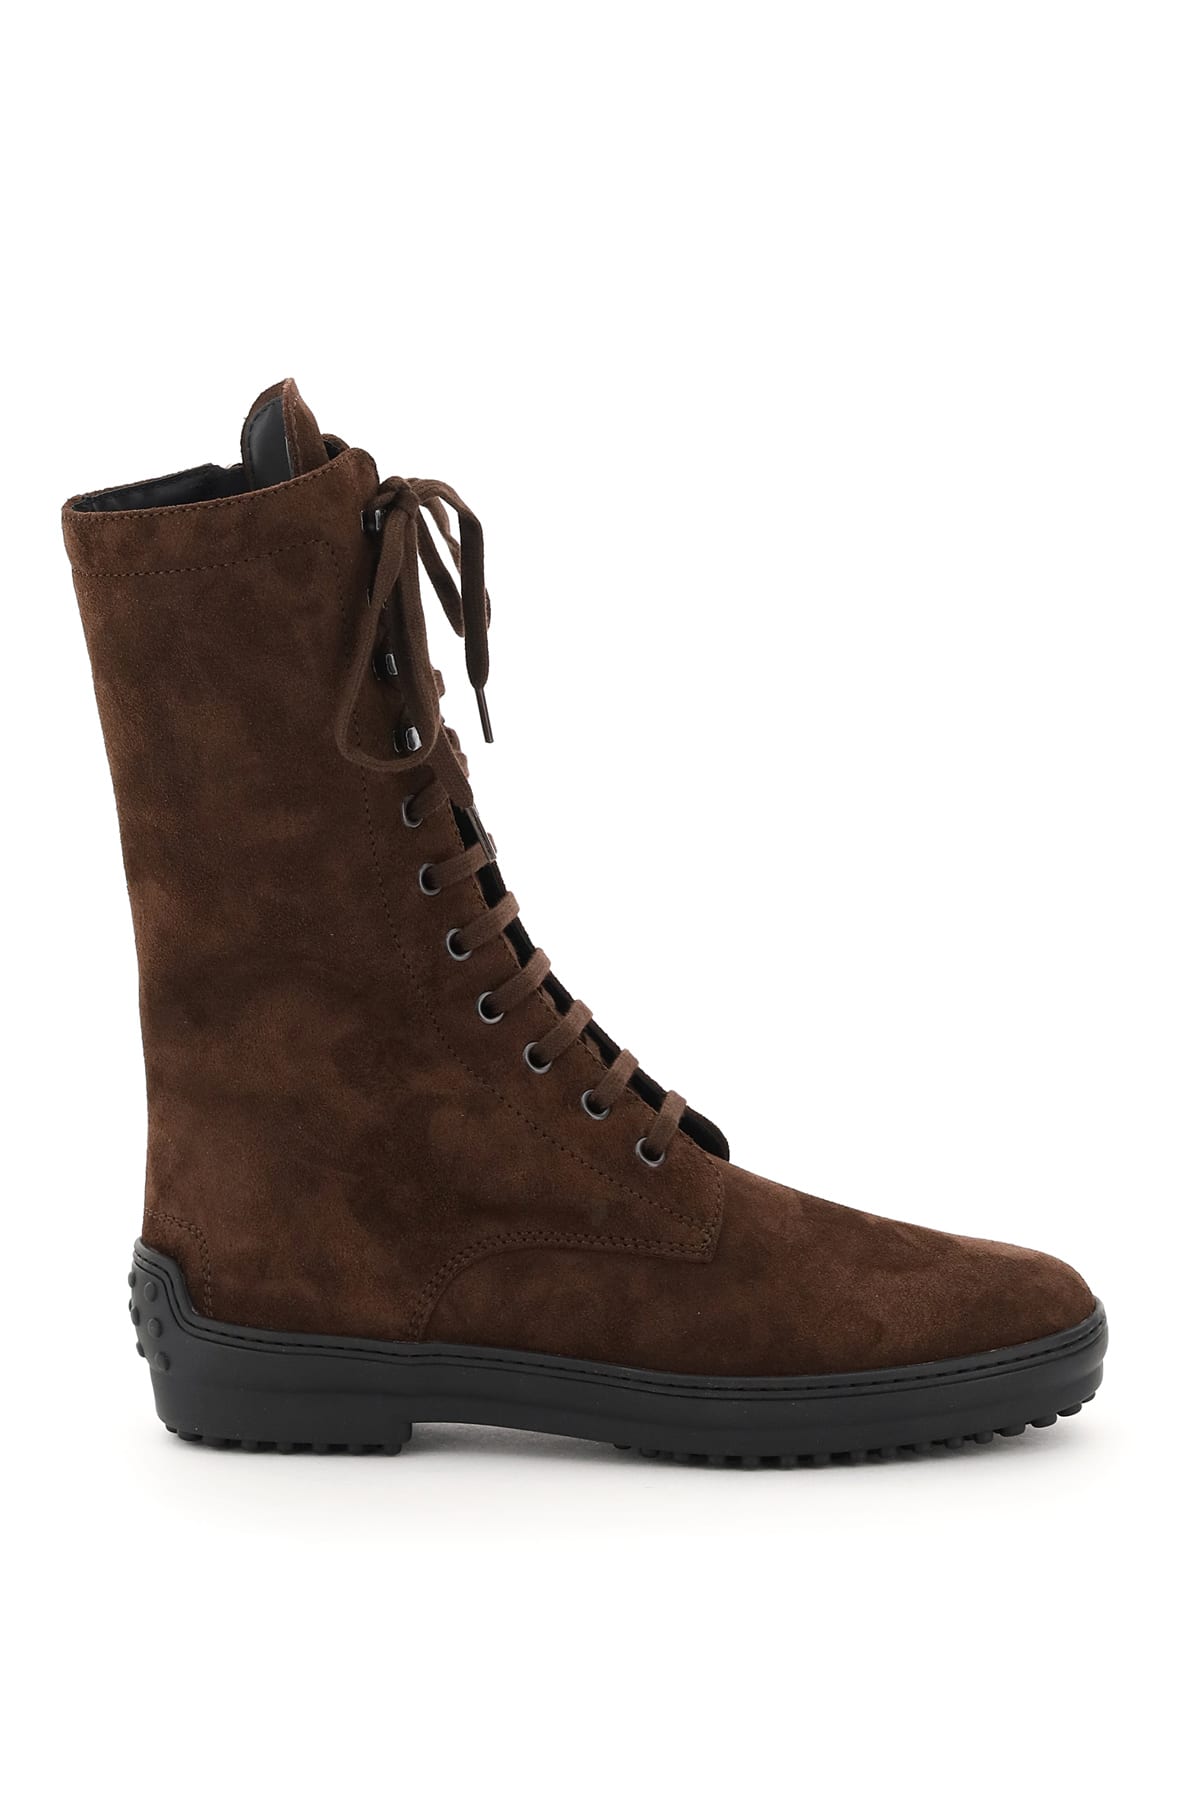 Tods Suede Leather Reversed Boots